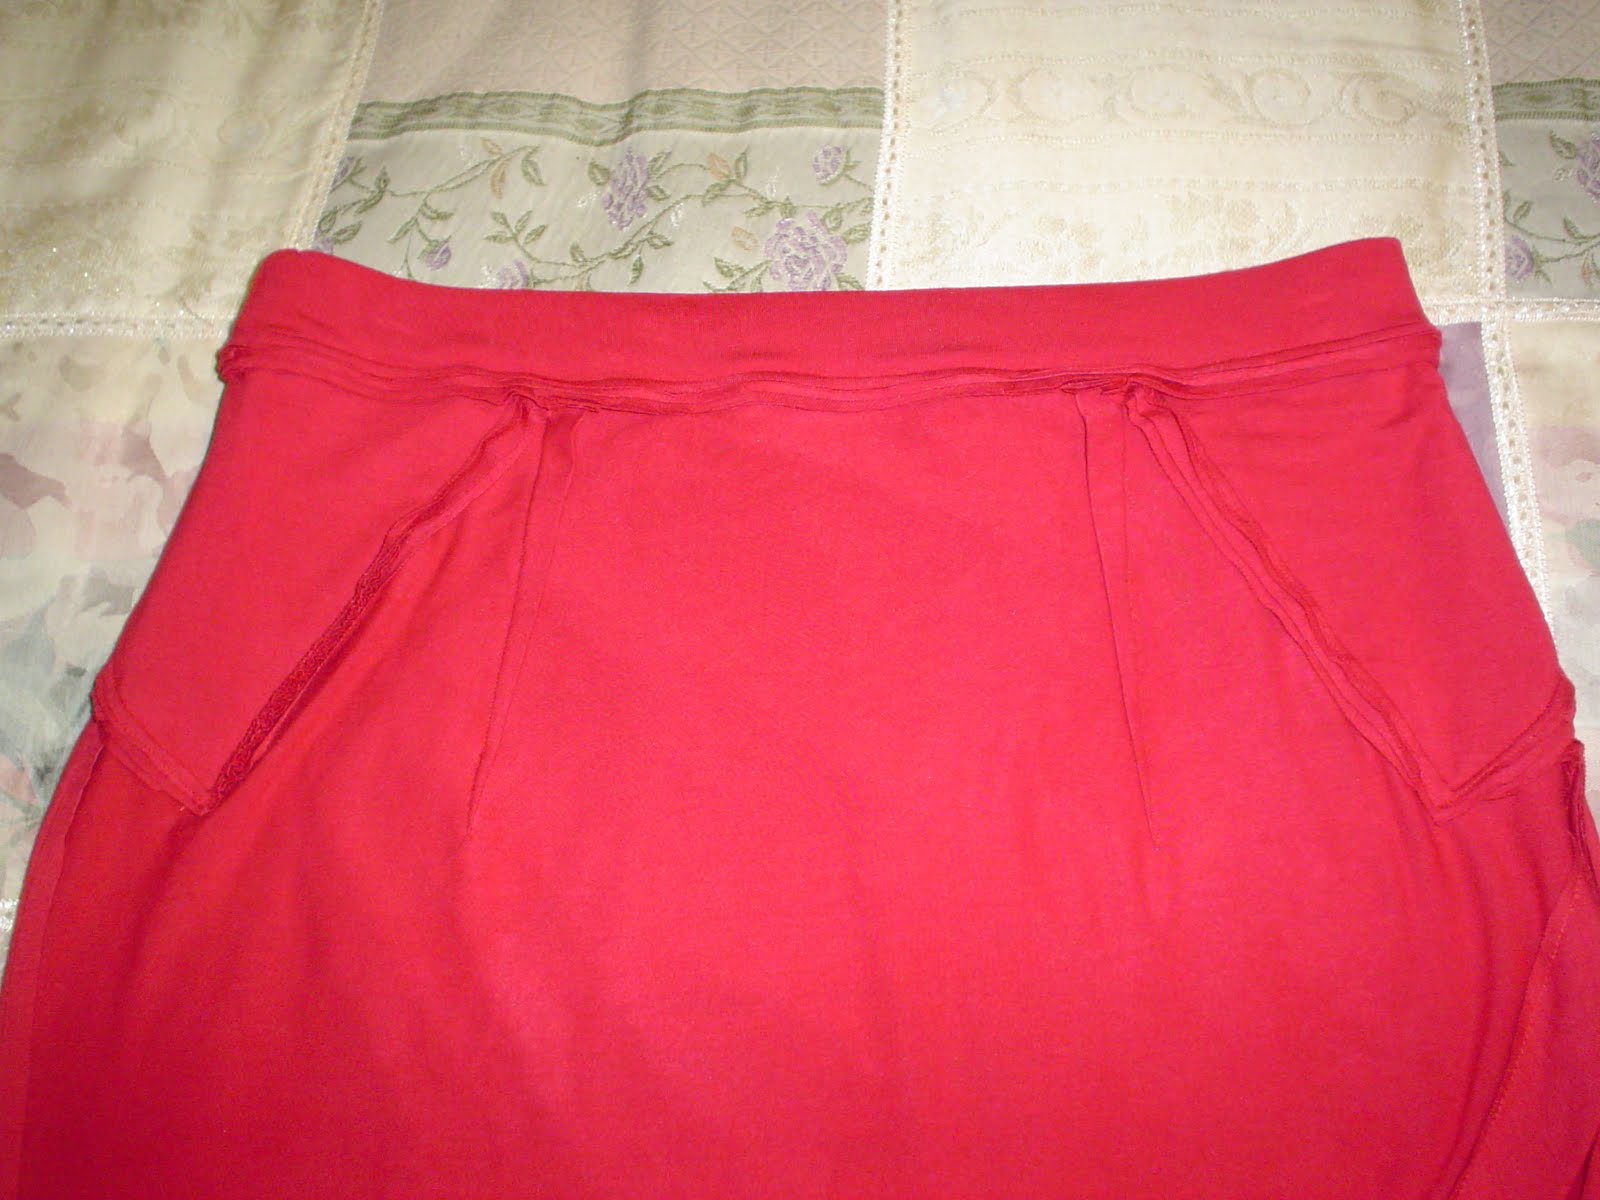 Amanda's Adventures in Sewing: Vogue 8711 - Red bamboo knit skirt